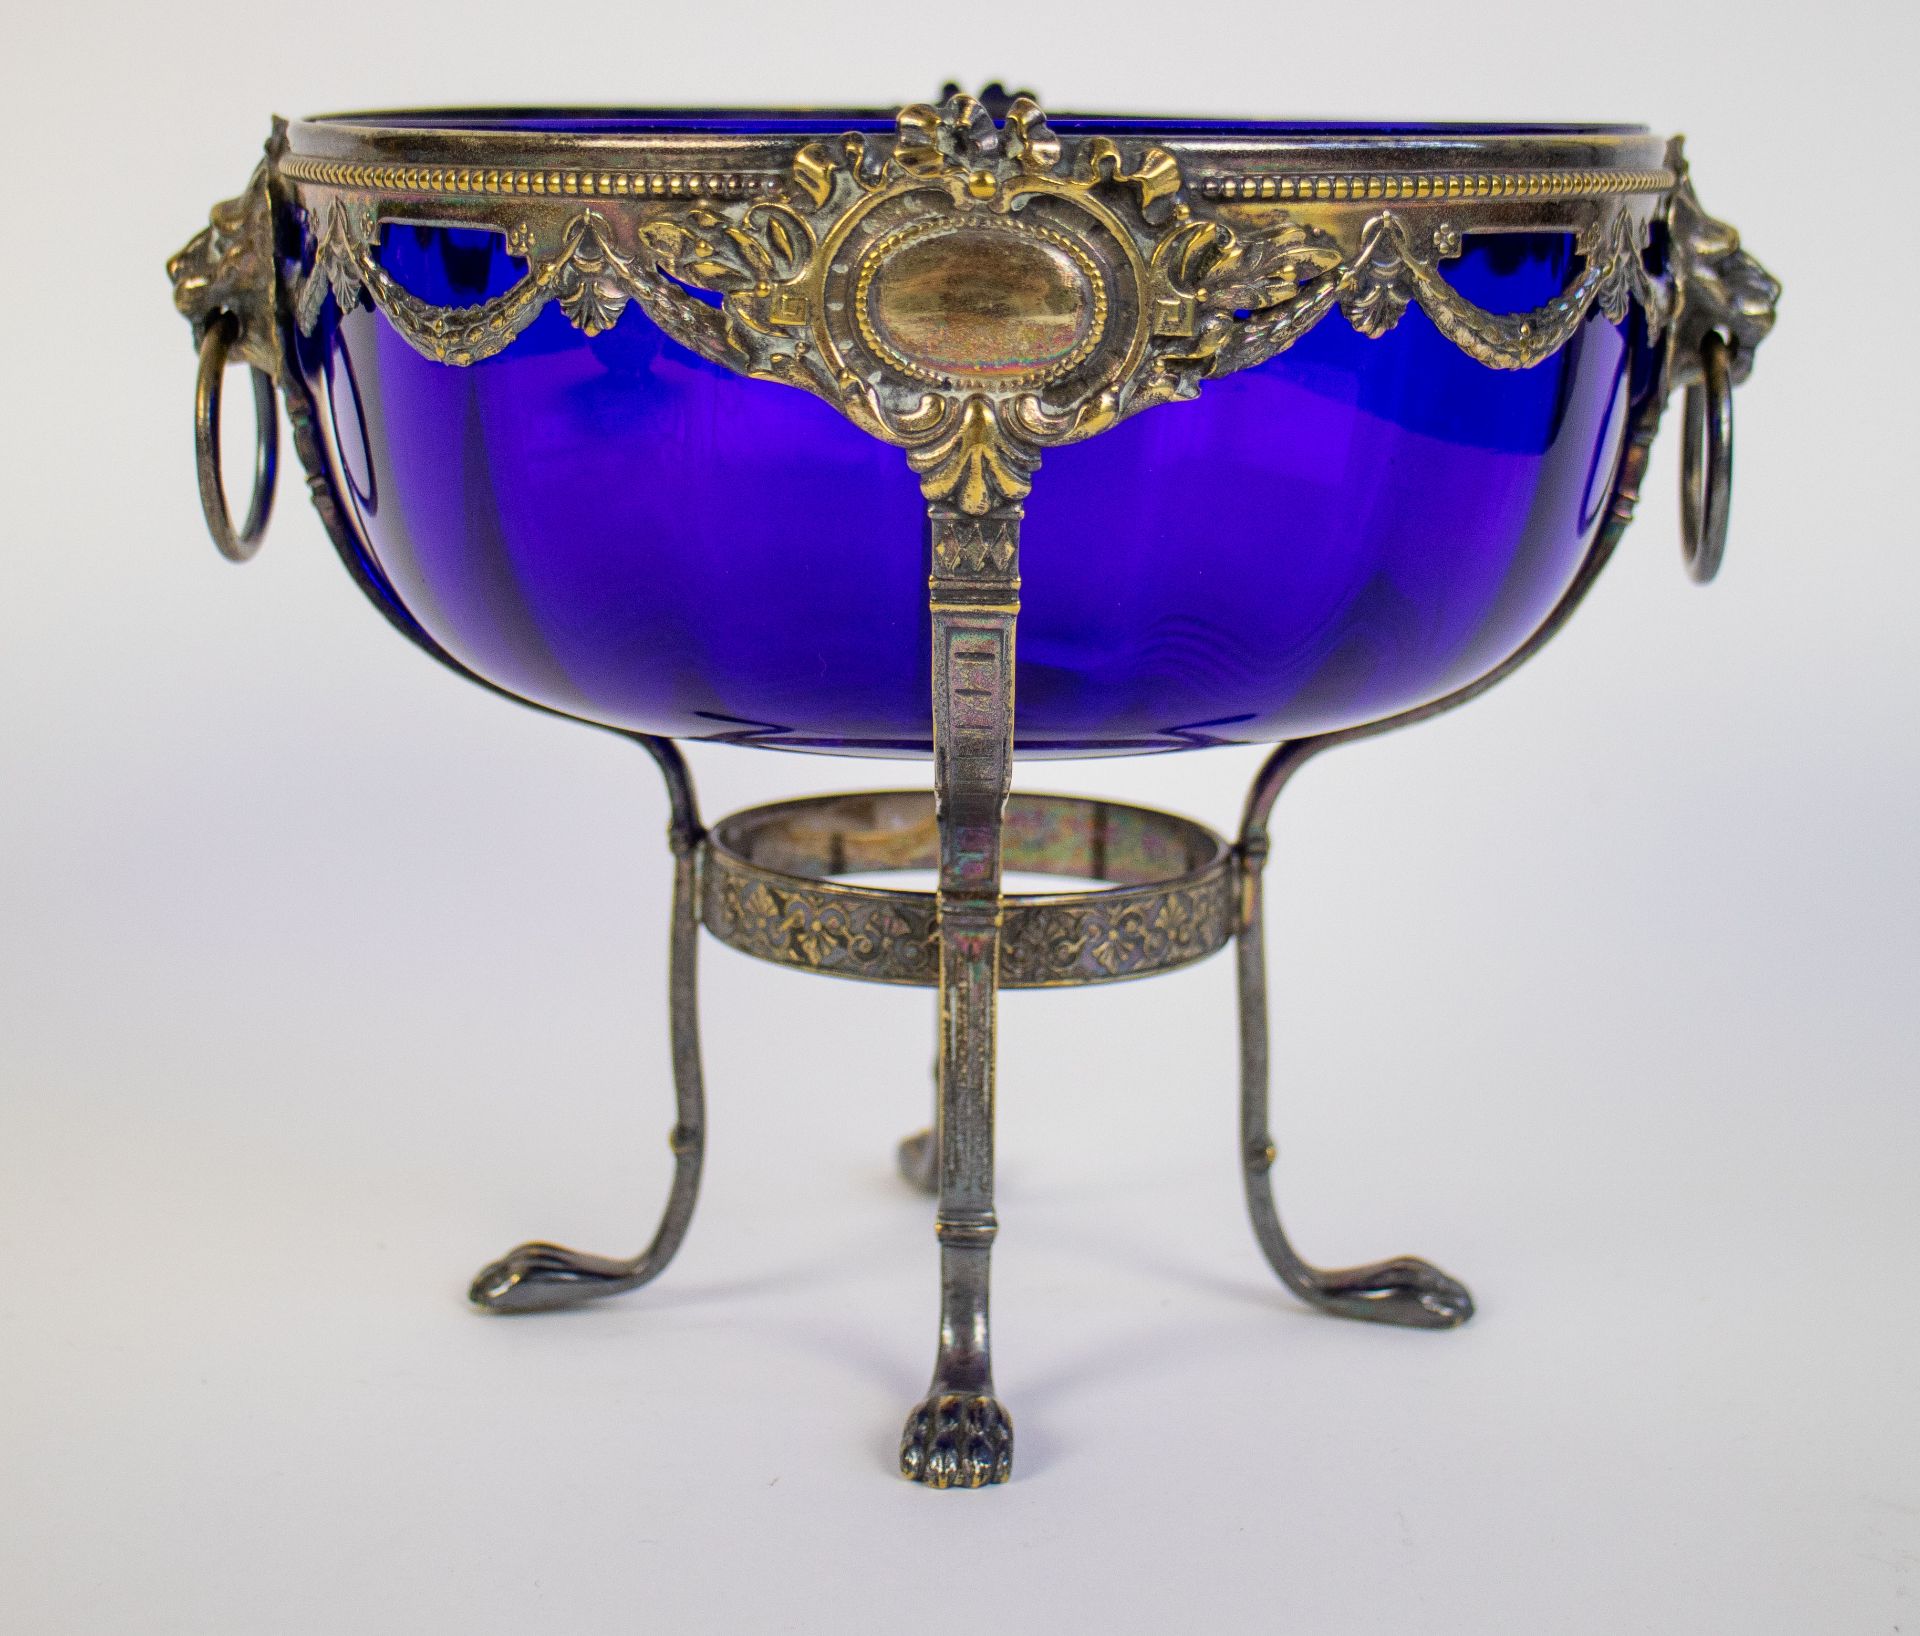 Blue glass cup in silver WMF frame - Image 4 of 6